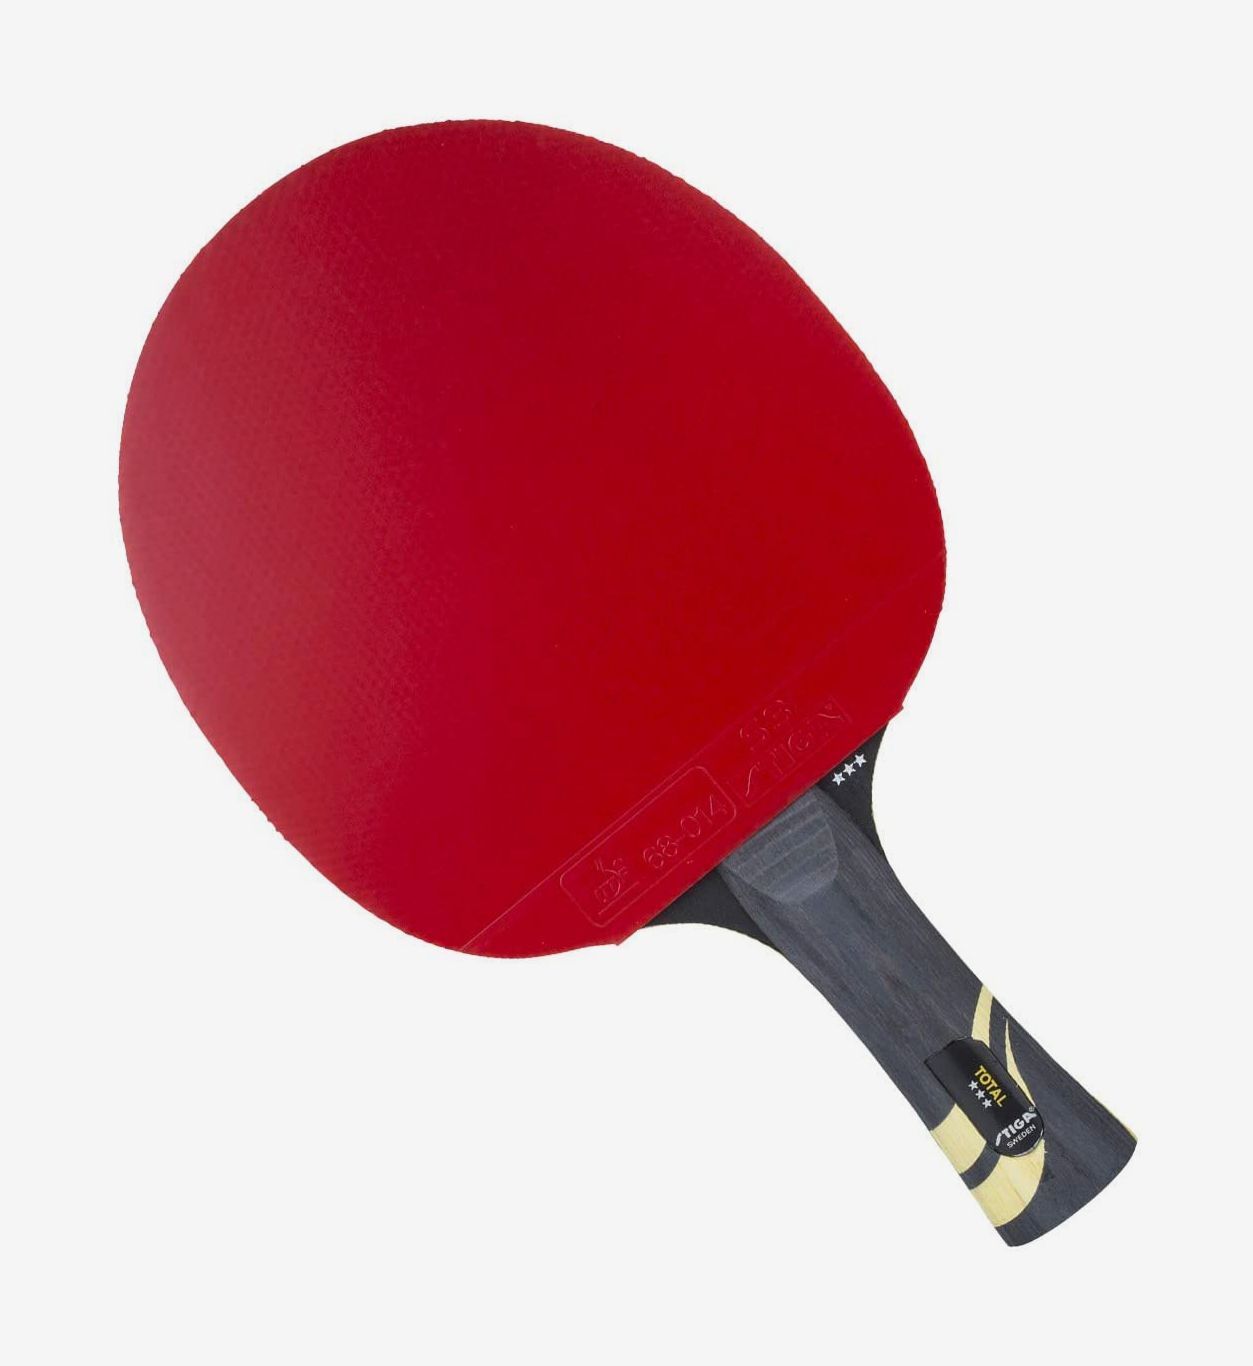 GENUINE Palio 3 Star Ping Pong Paddle Table Tennis Racket & FREE Case Long hand 